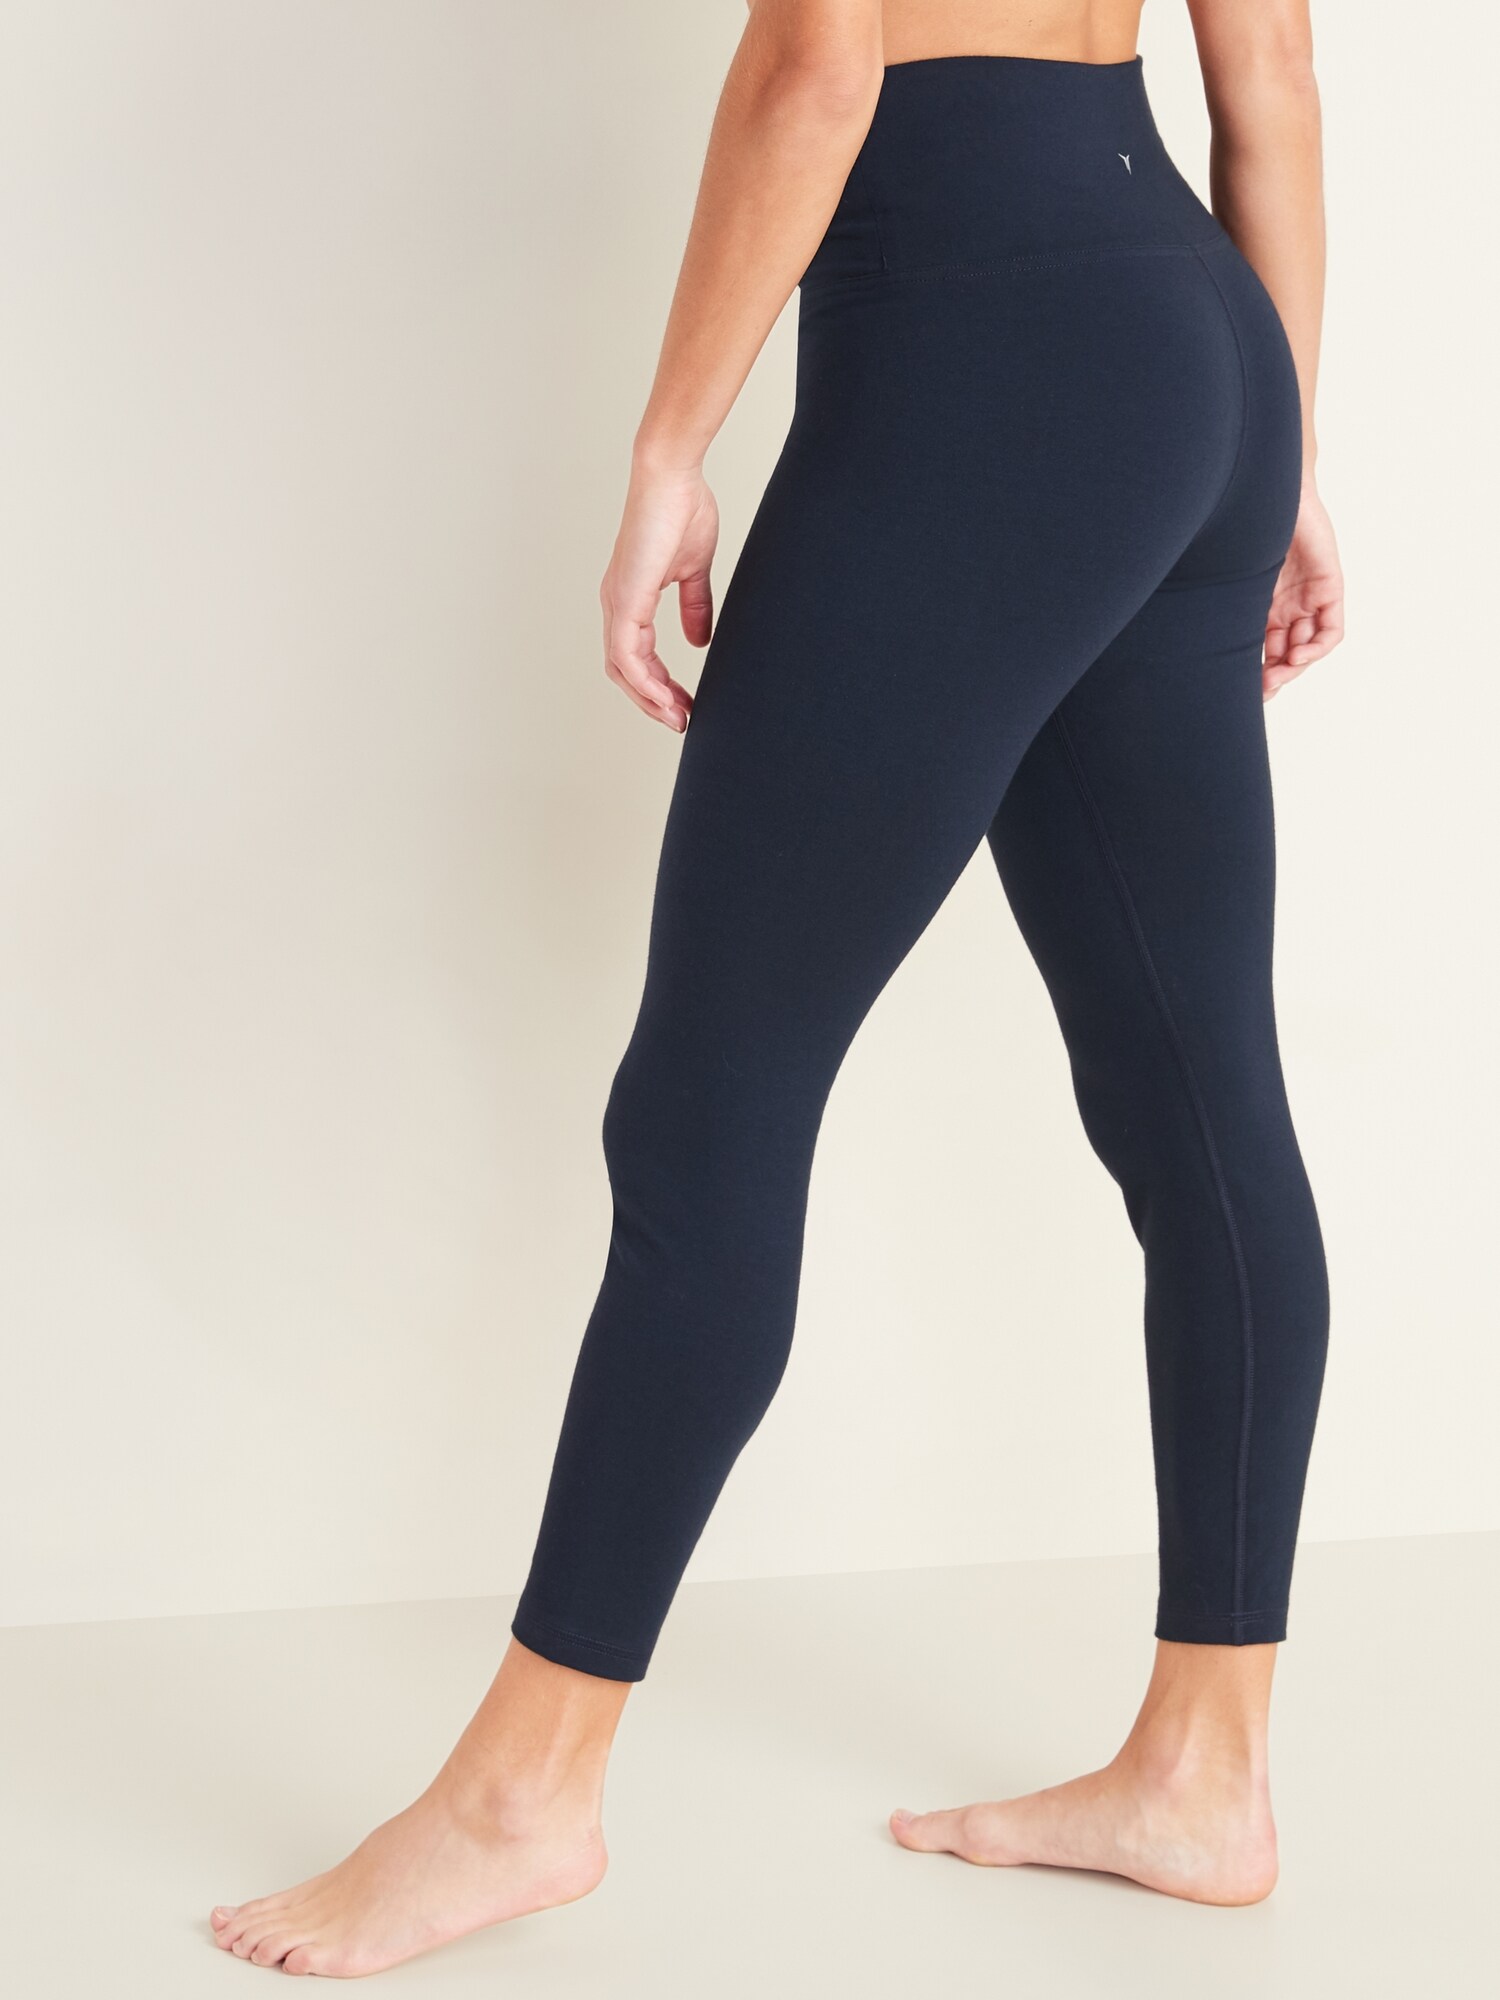 Old Navy Women's & Girls Leggings from $7.49, Lots of Style Choices!